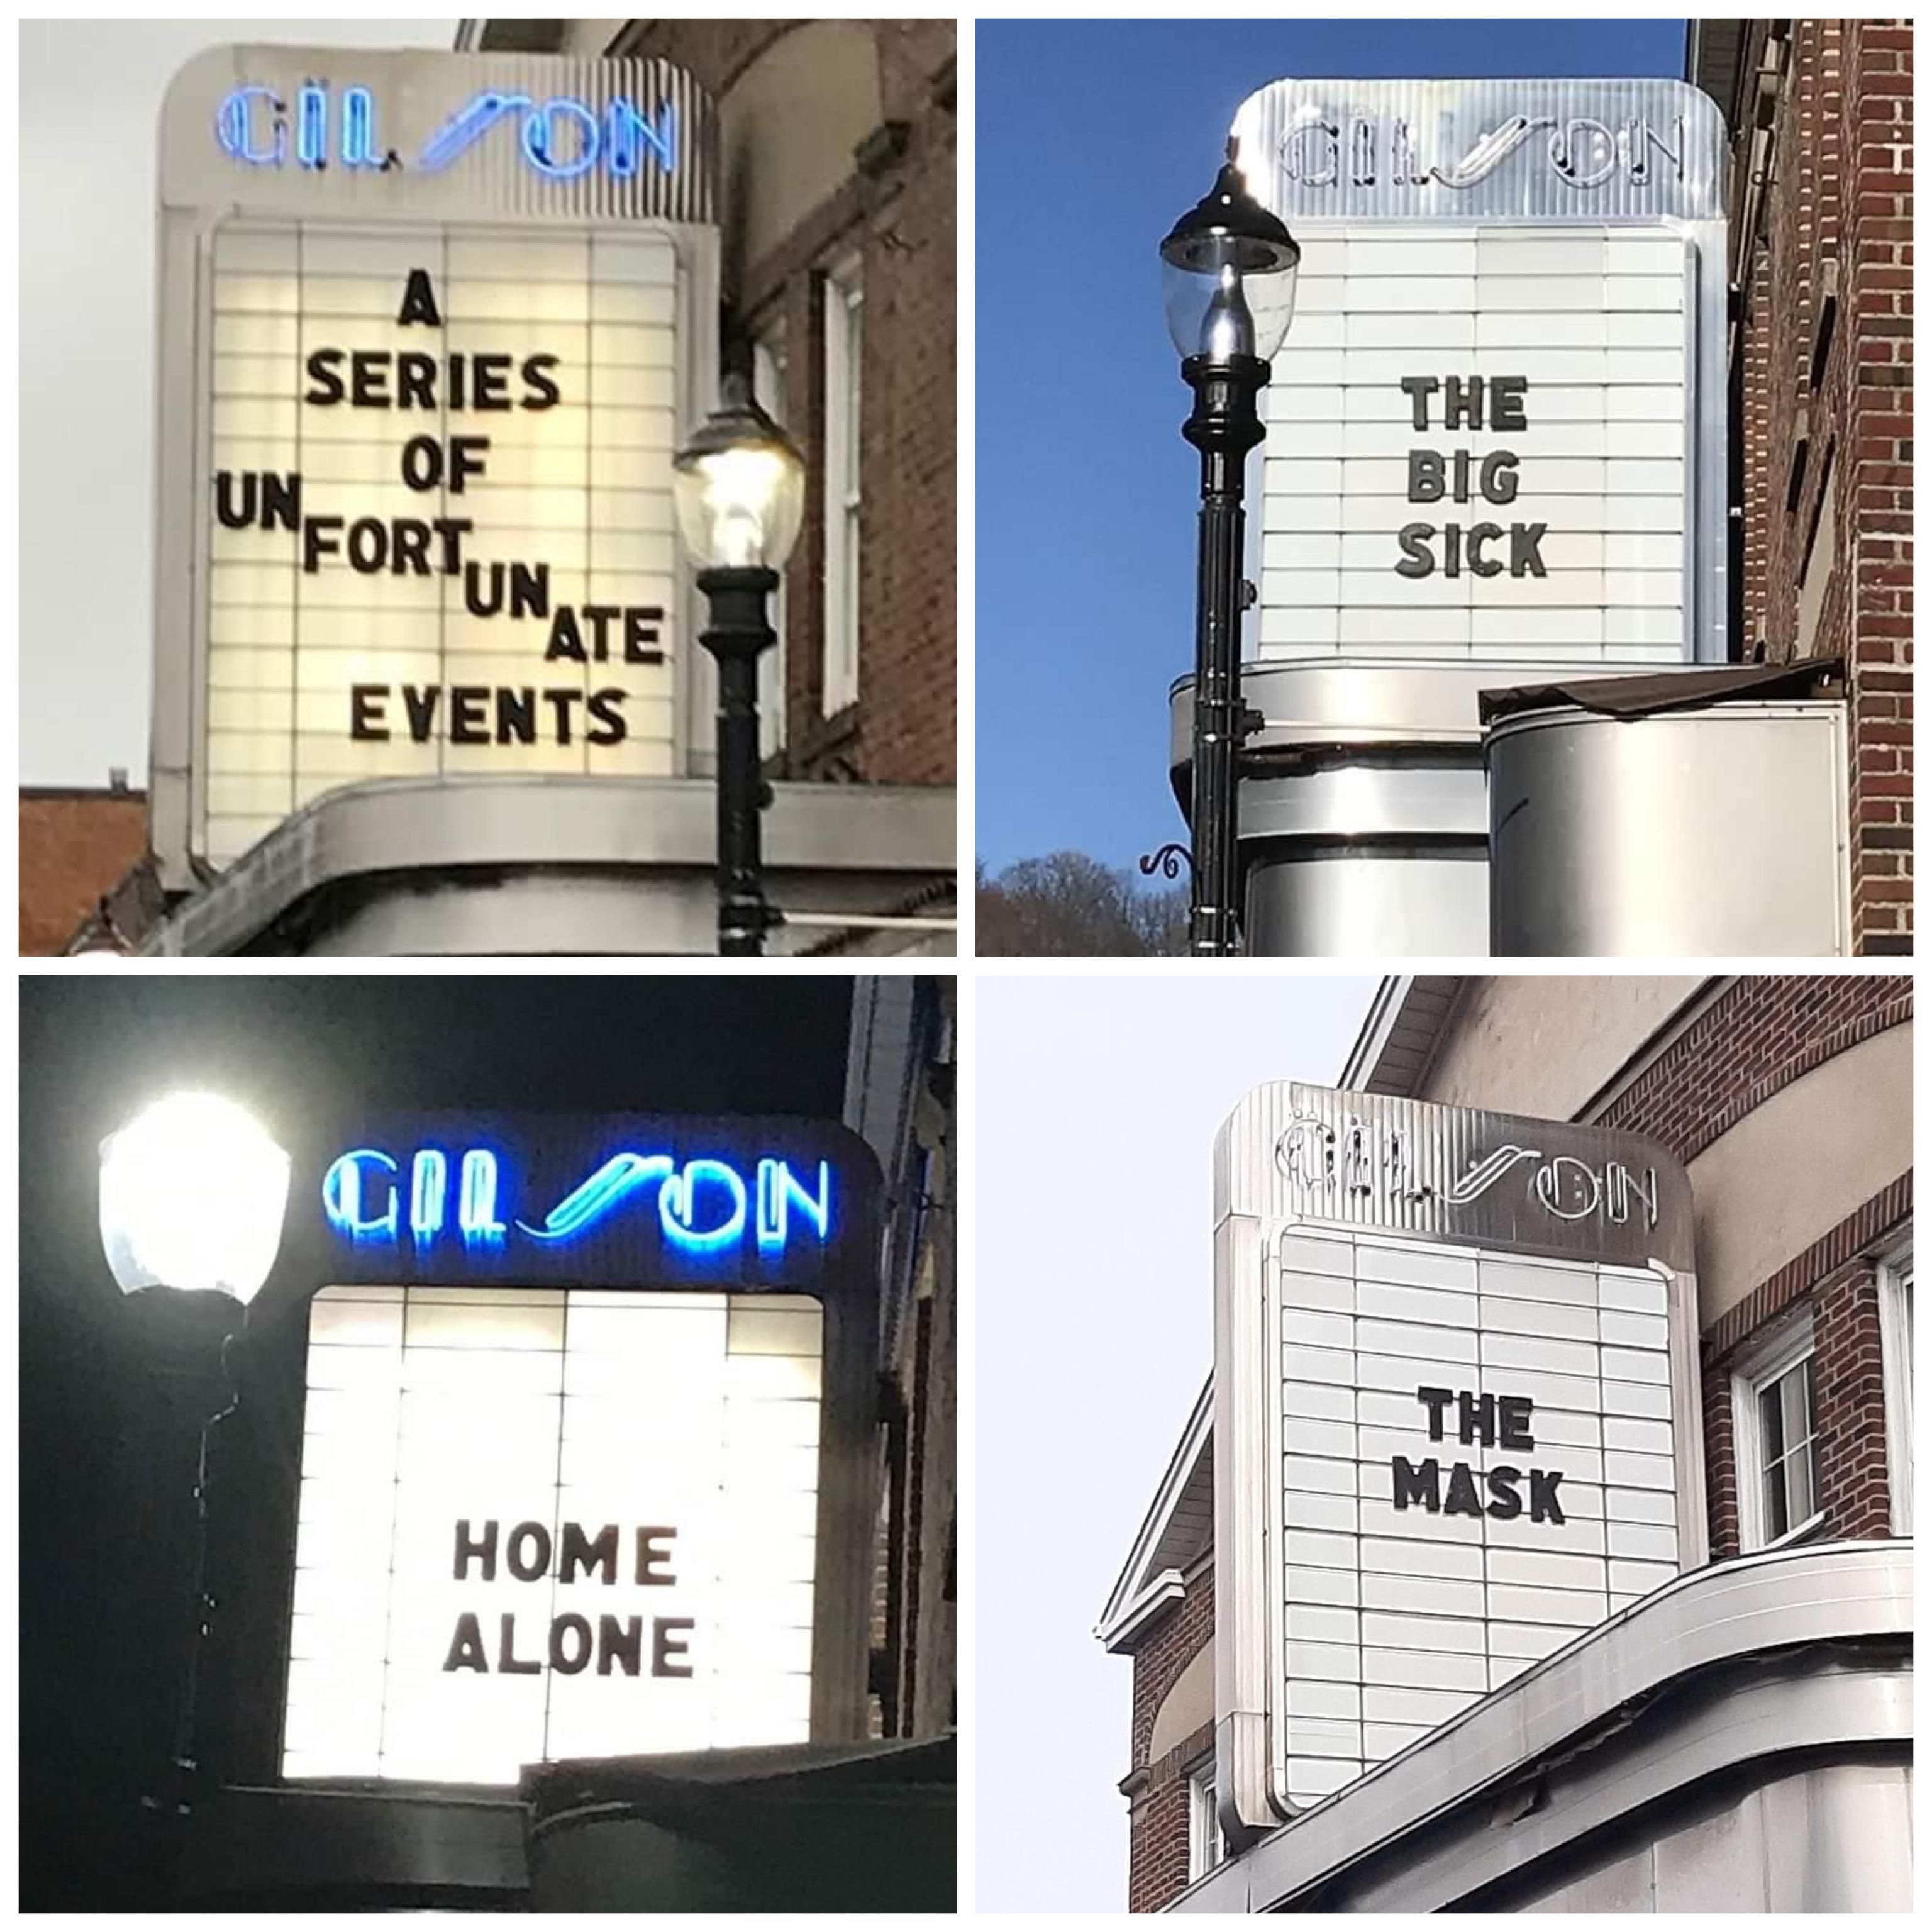 A small movie theater near my best friend’s house has been putting up relevant movie titles while they’ve been closed due to the pandemic